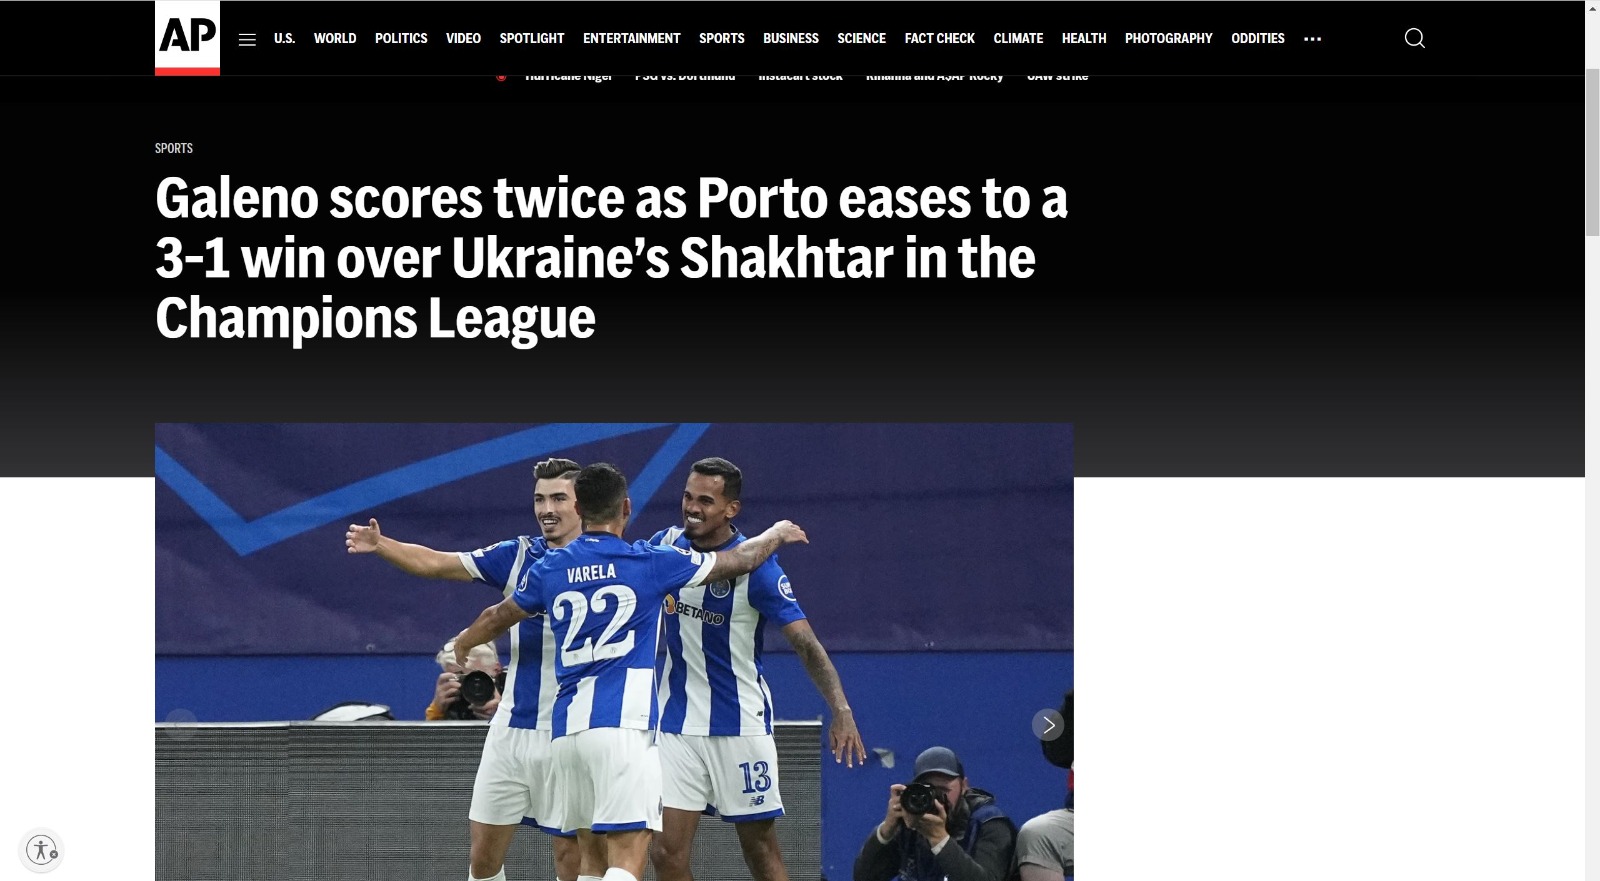 Galeno scores twice as Porto eases to a 3-1 win over Ukraine's